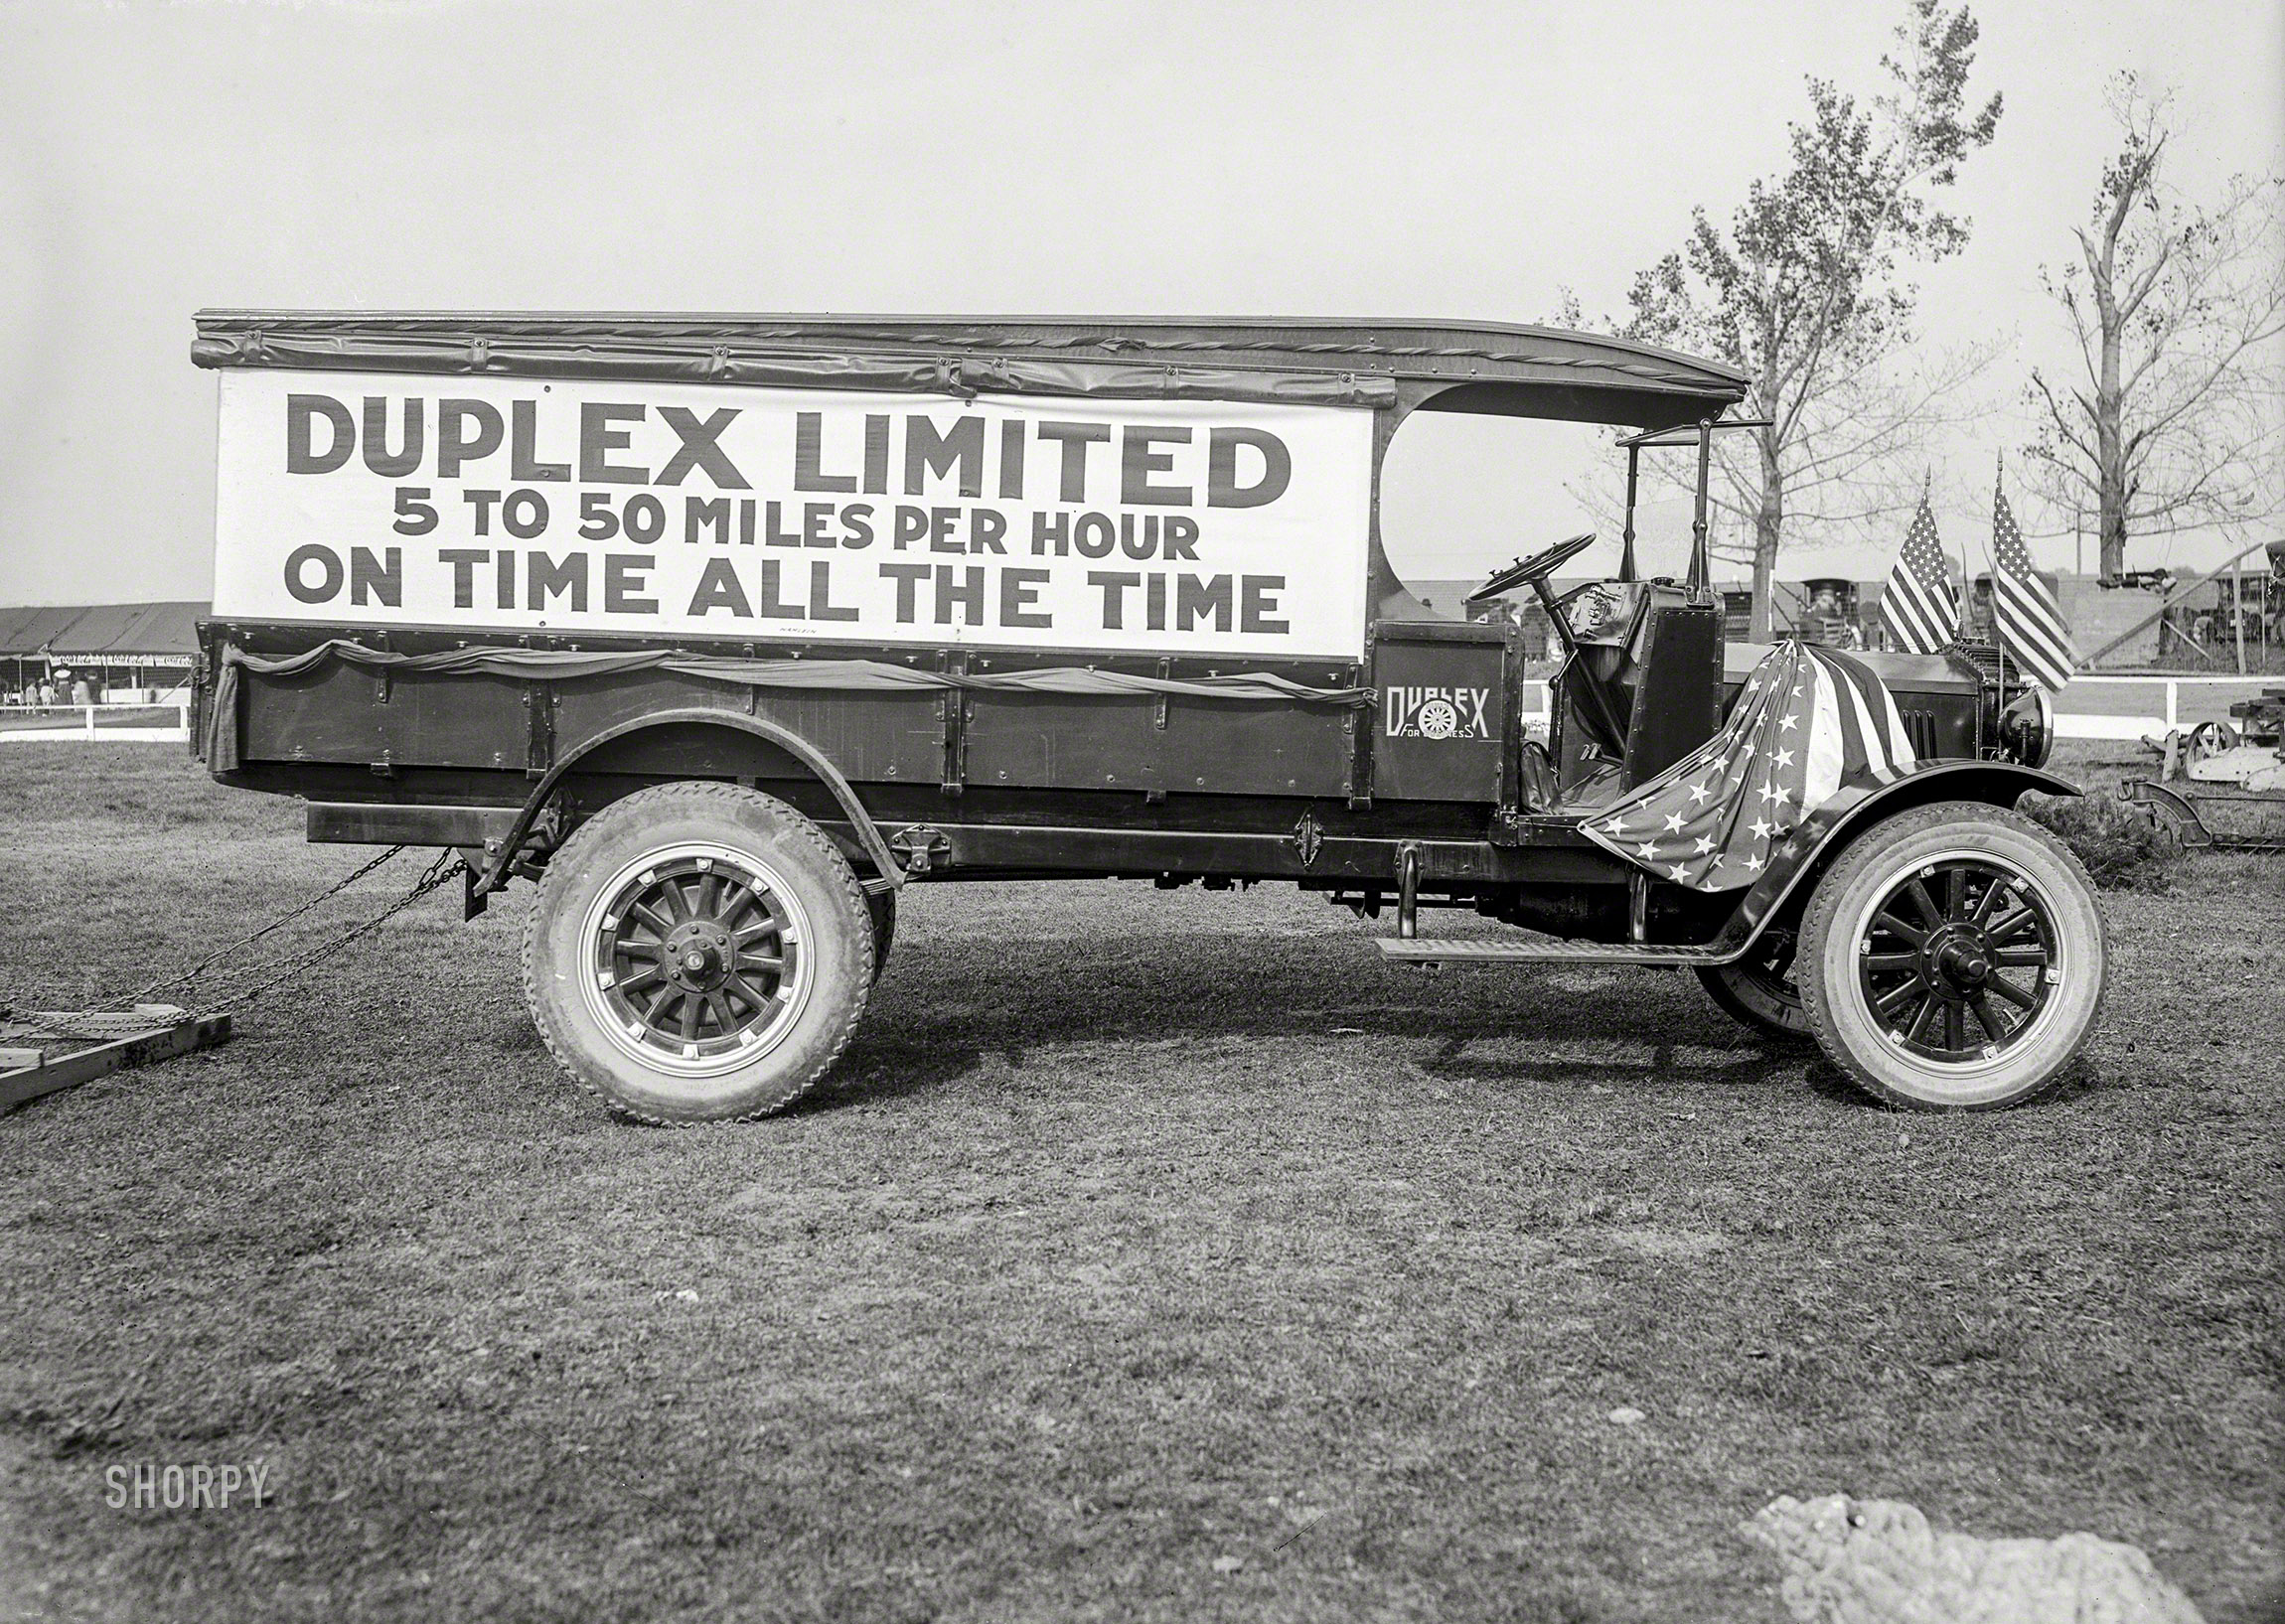 October 1921. Frederick, Maryland. "Washington Herald tours -- Duplex truck, Frederick Fair." National Photo Company Collection glass negative. View full size.